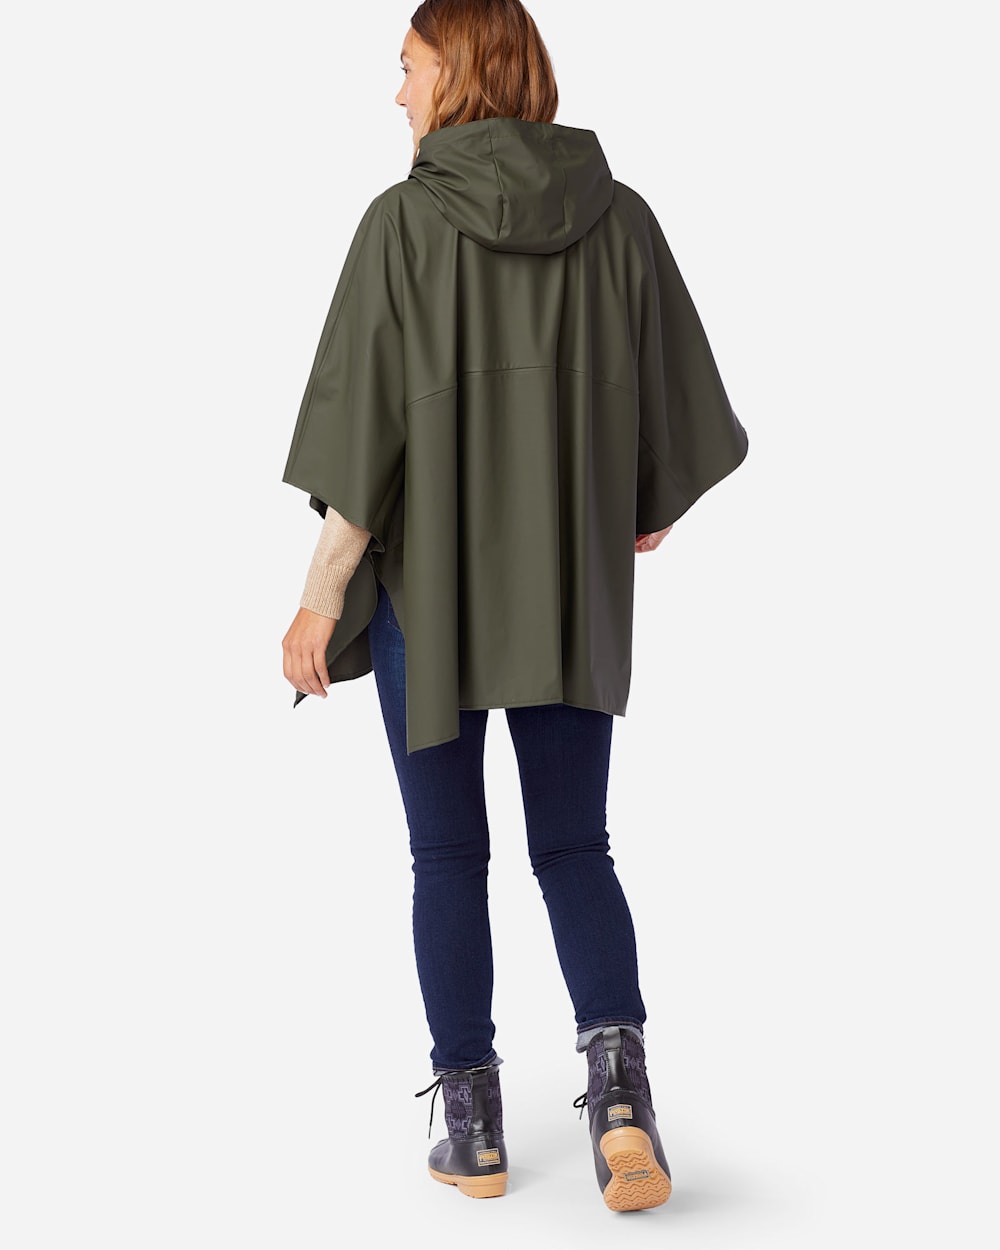 ALTERNATE VIEW OF WOMEN'S ZIP FRONT RAIN PONCHO IN OLIVE image number 4